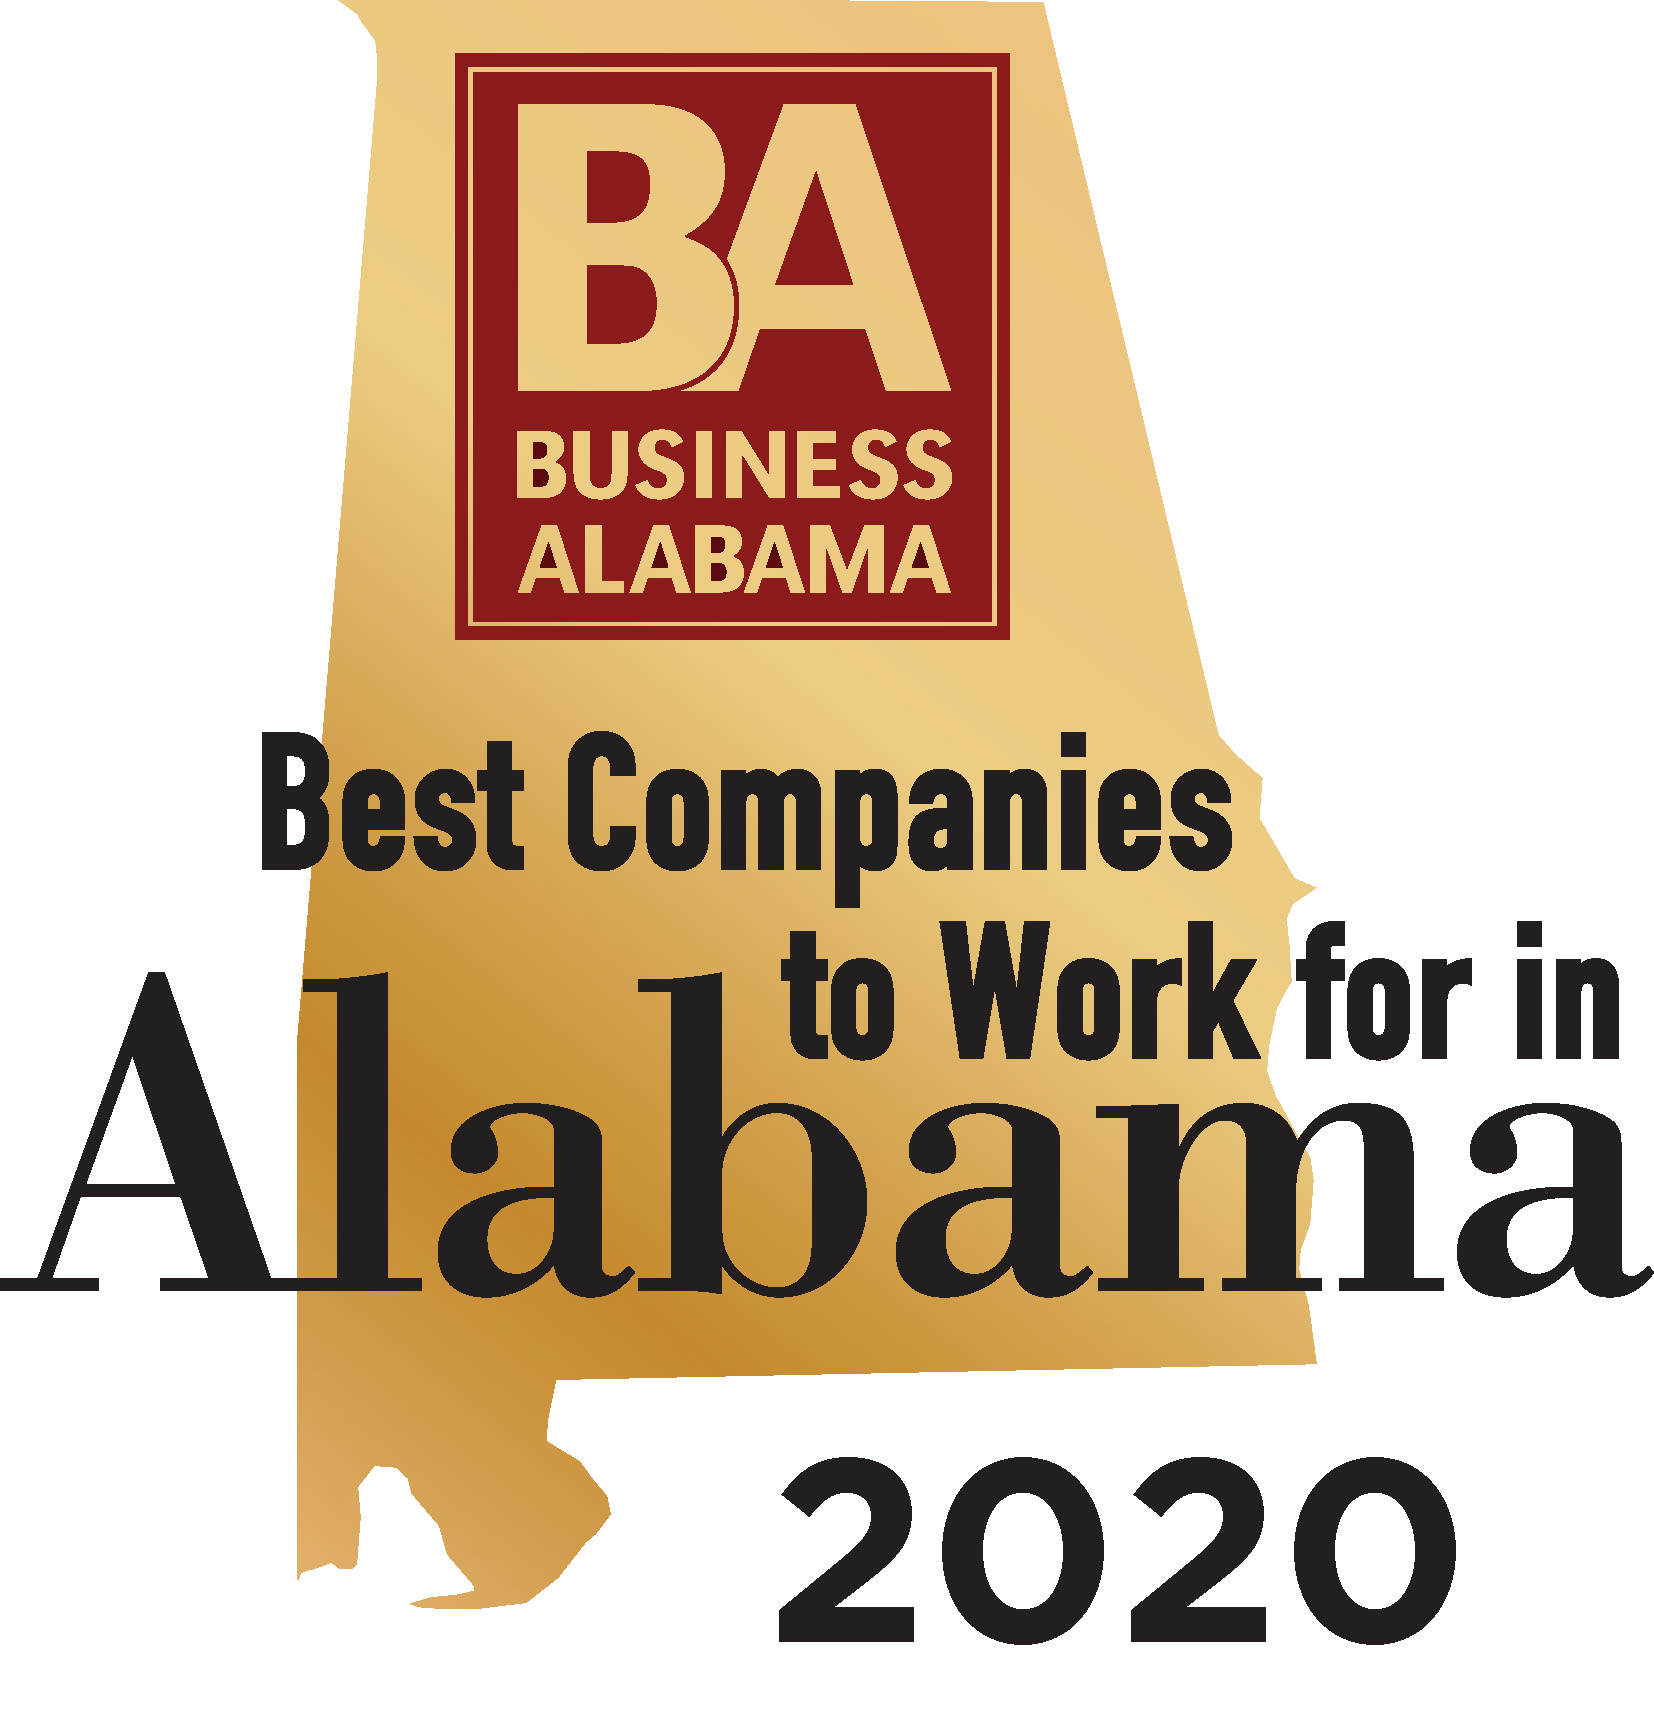 Best Companies to work for in Alabama 2020